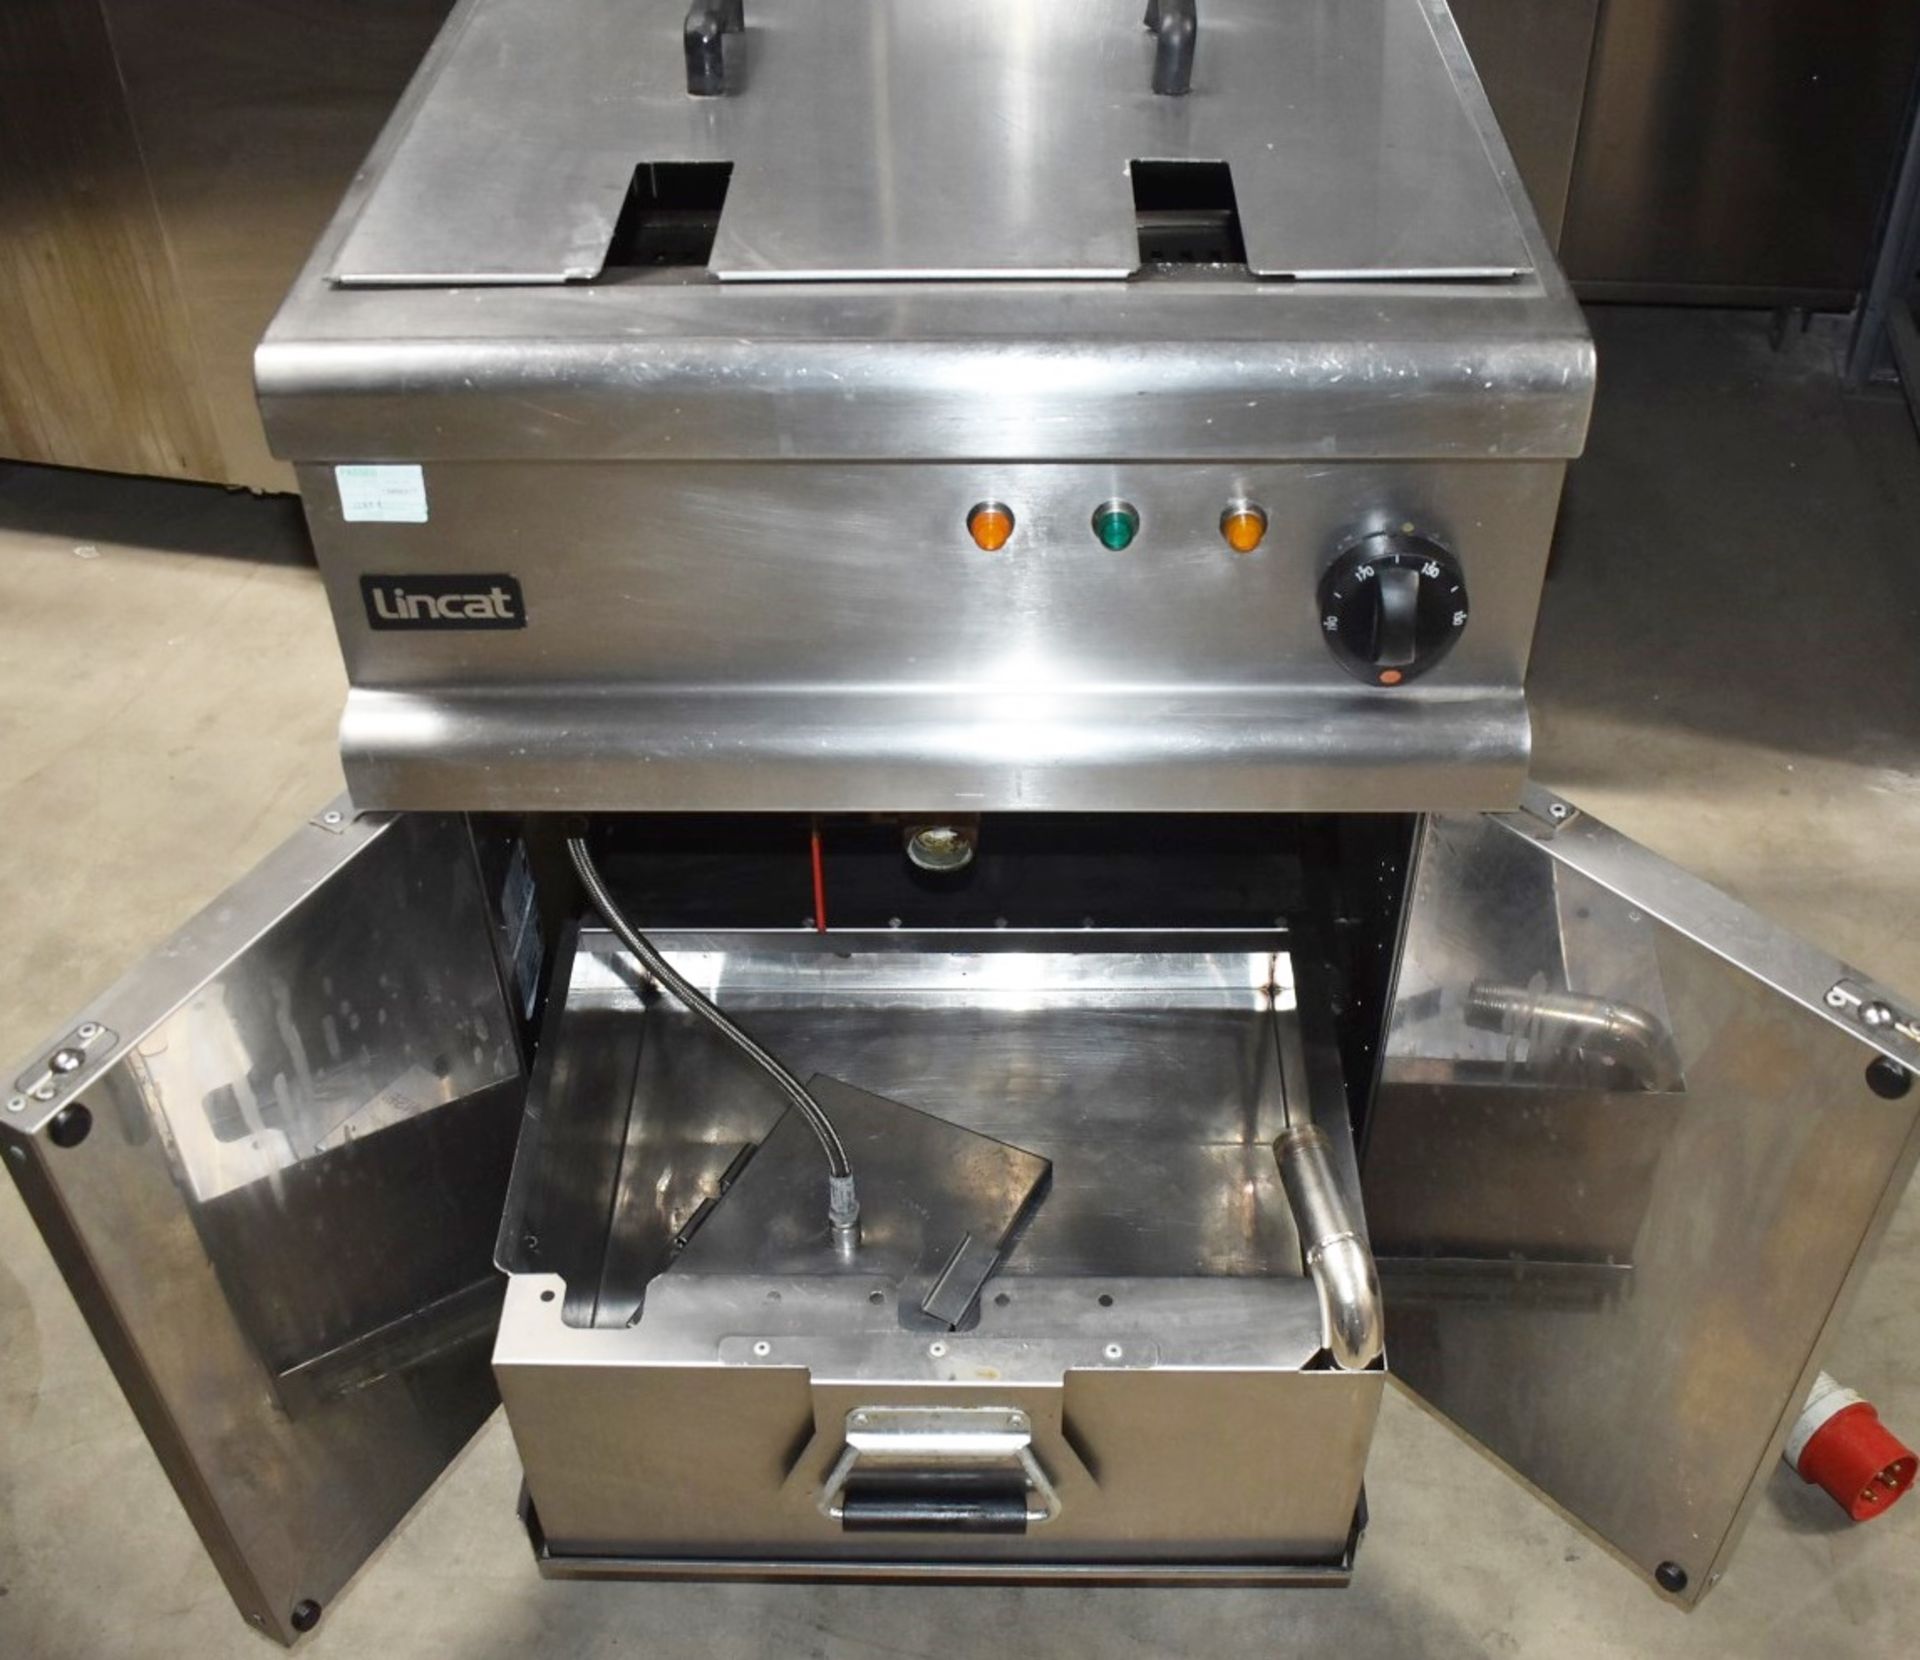 1 x Lincat Opus 700 Single Tank Electric Fryer With Built In Filtration - 3 Phase - Image 10 of 19